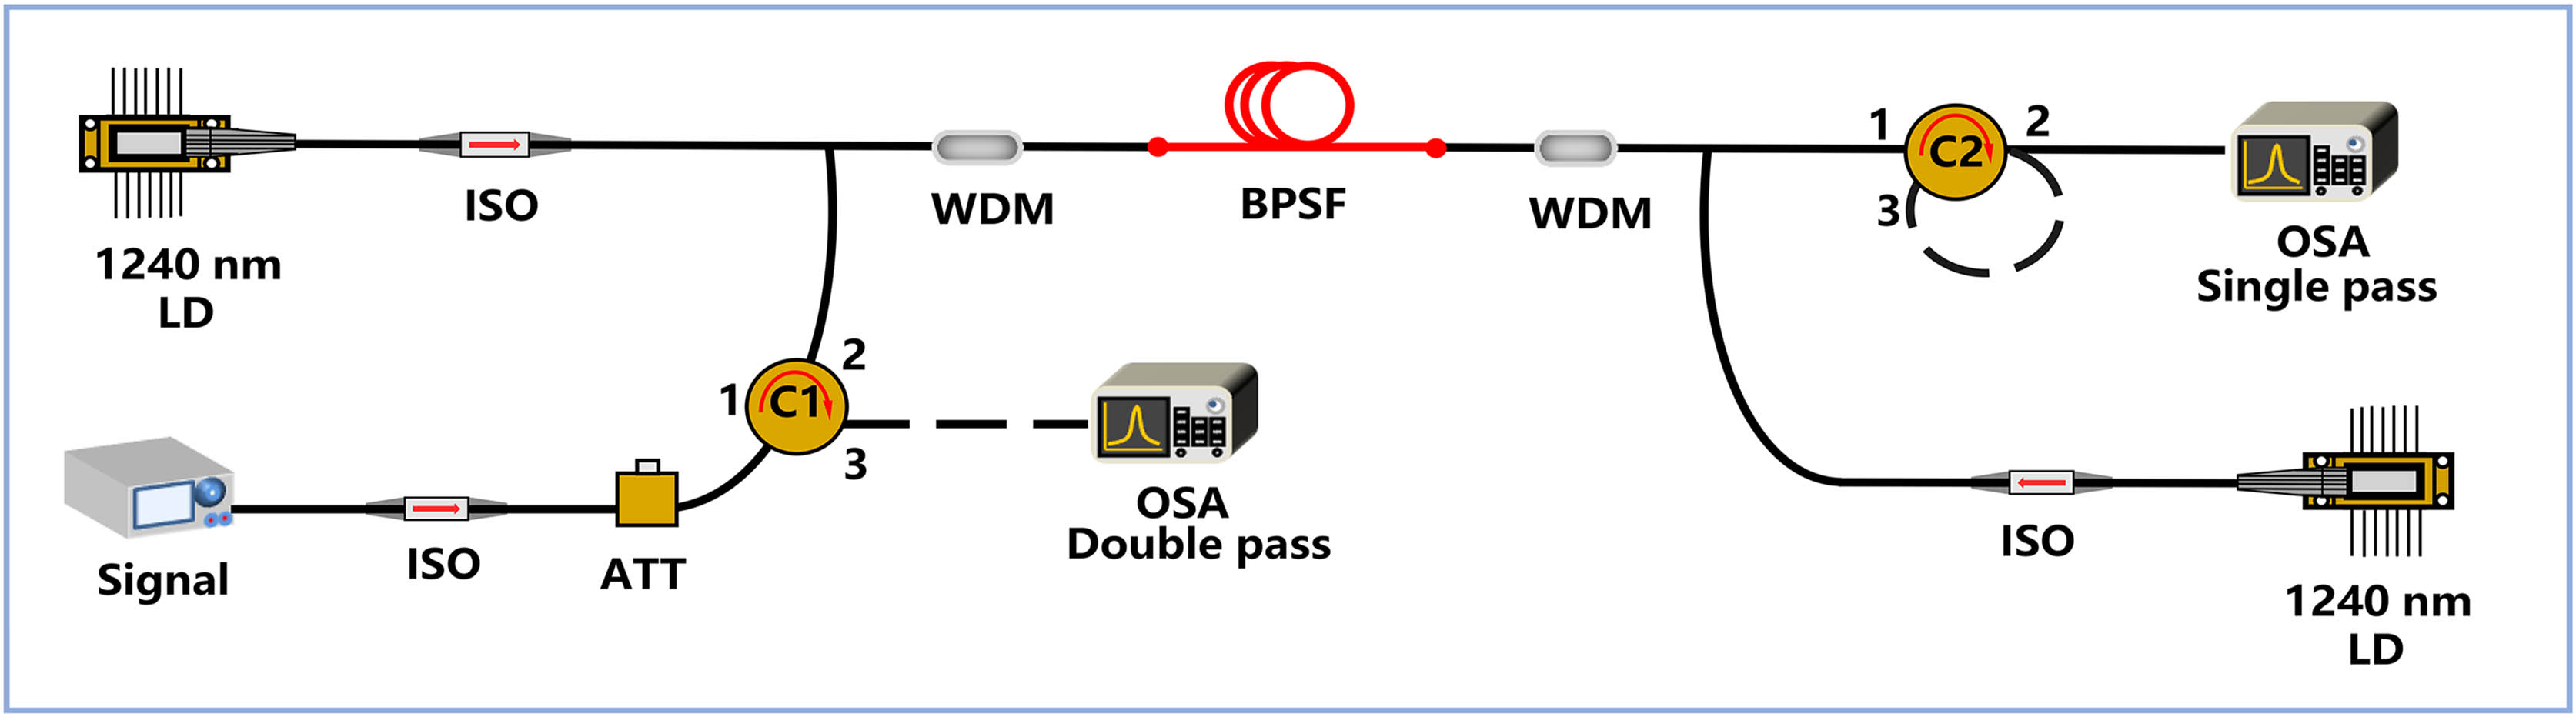 Experimental setup of the single-pass (solid, without C1 and C2) and double-pass (dashed) BDFA.